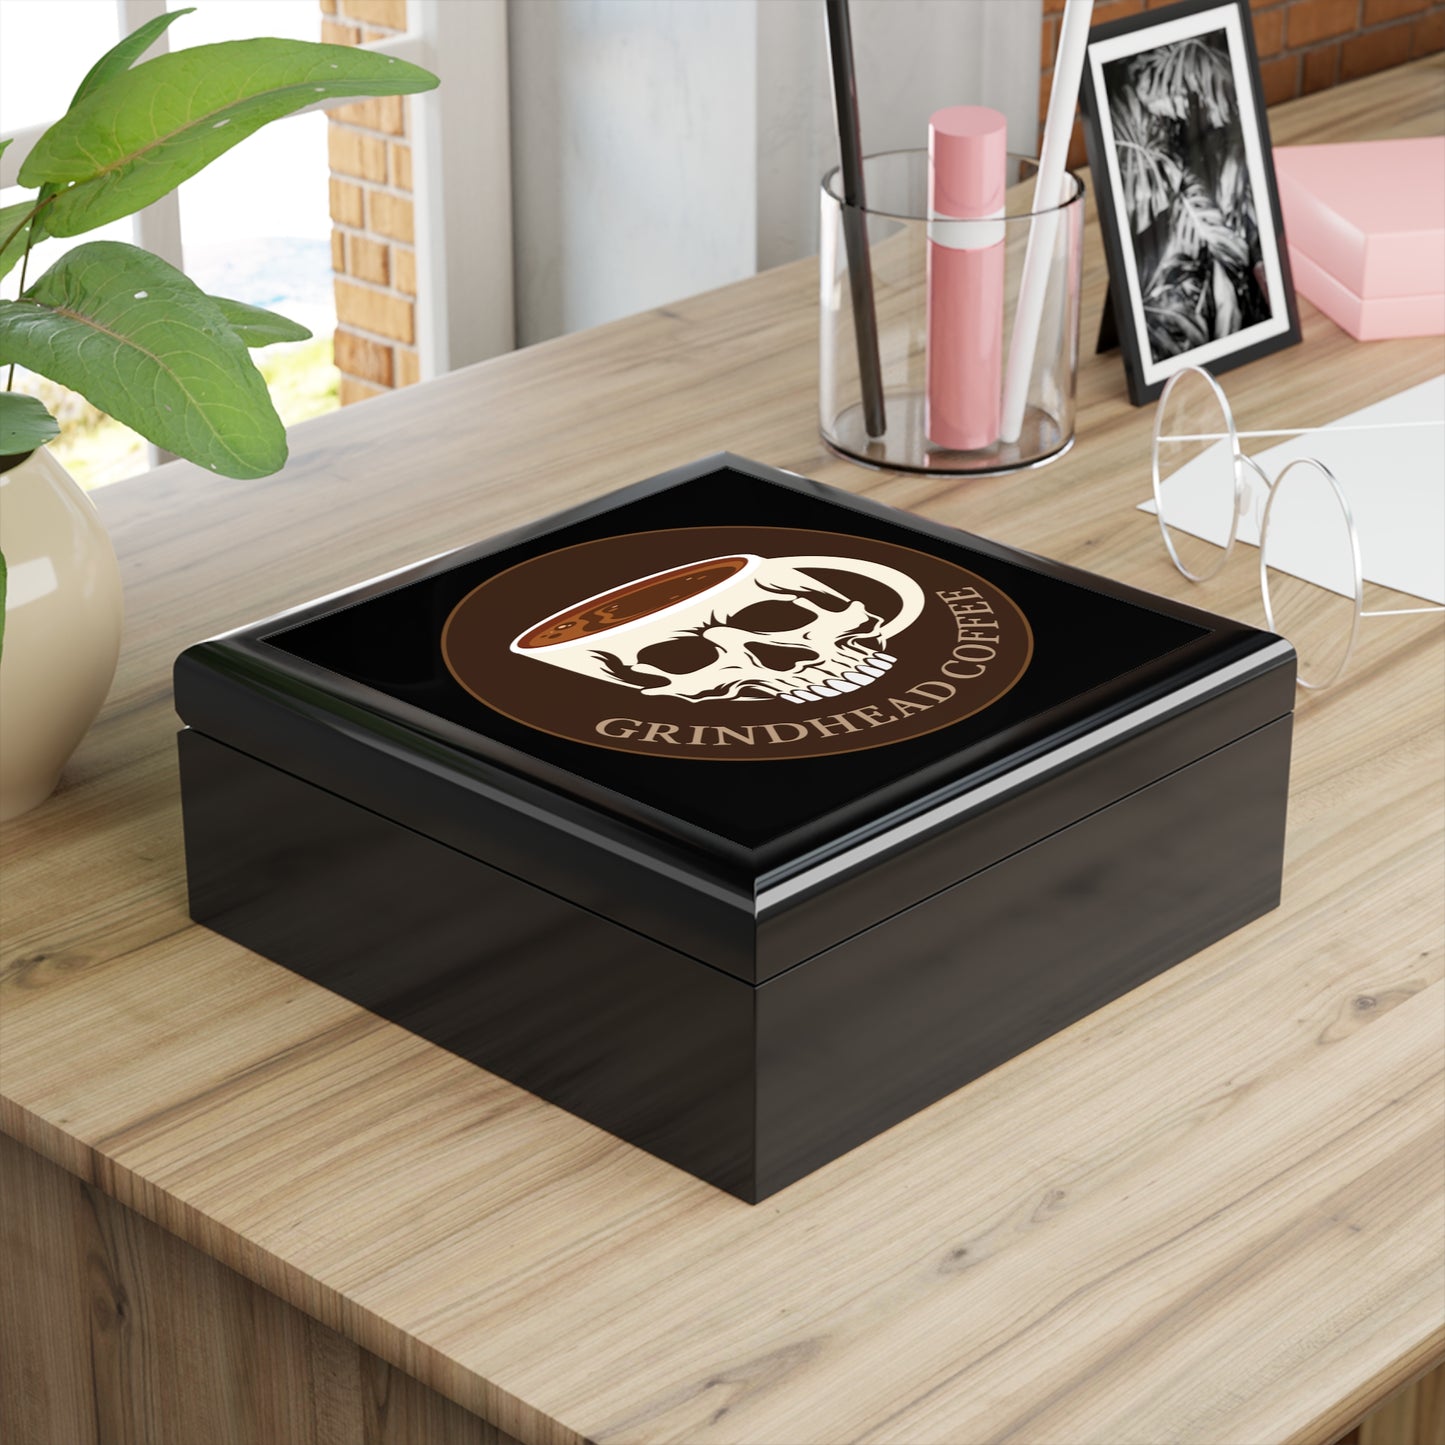 Grindhead Wooden Box - Free Shipping!